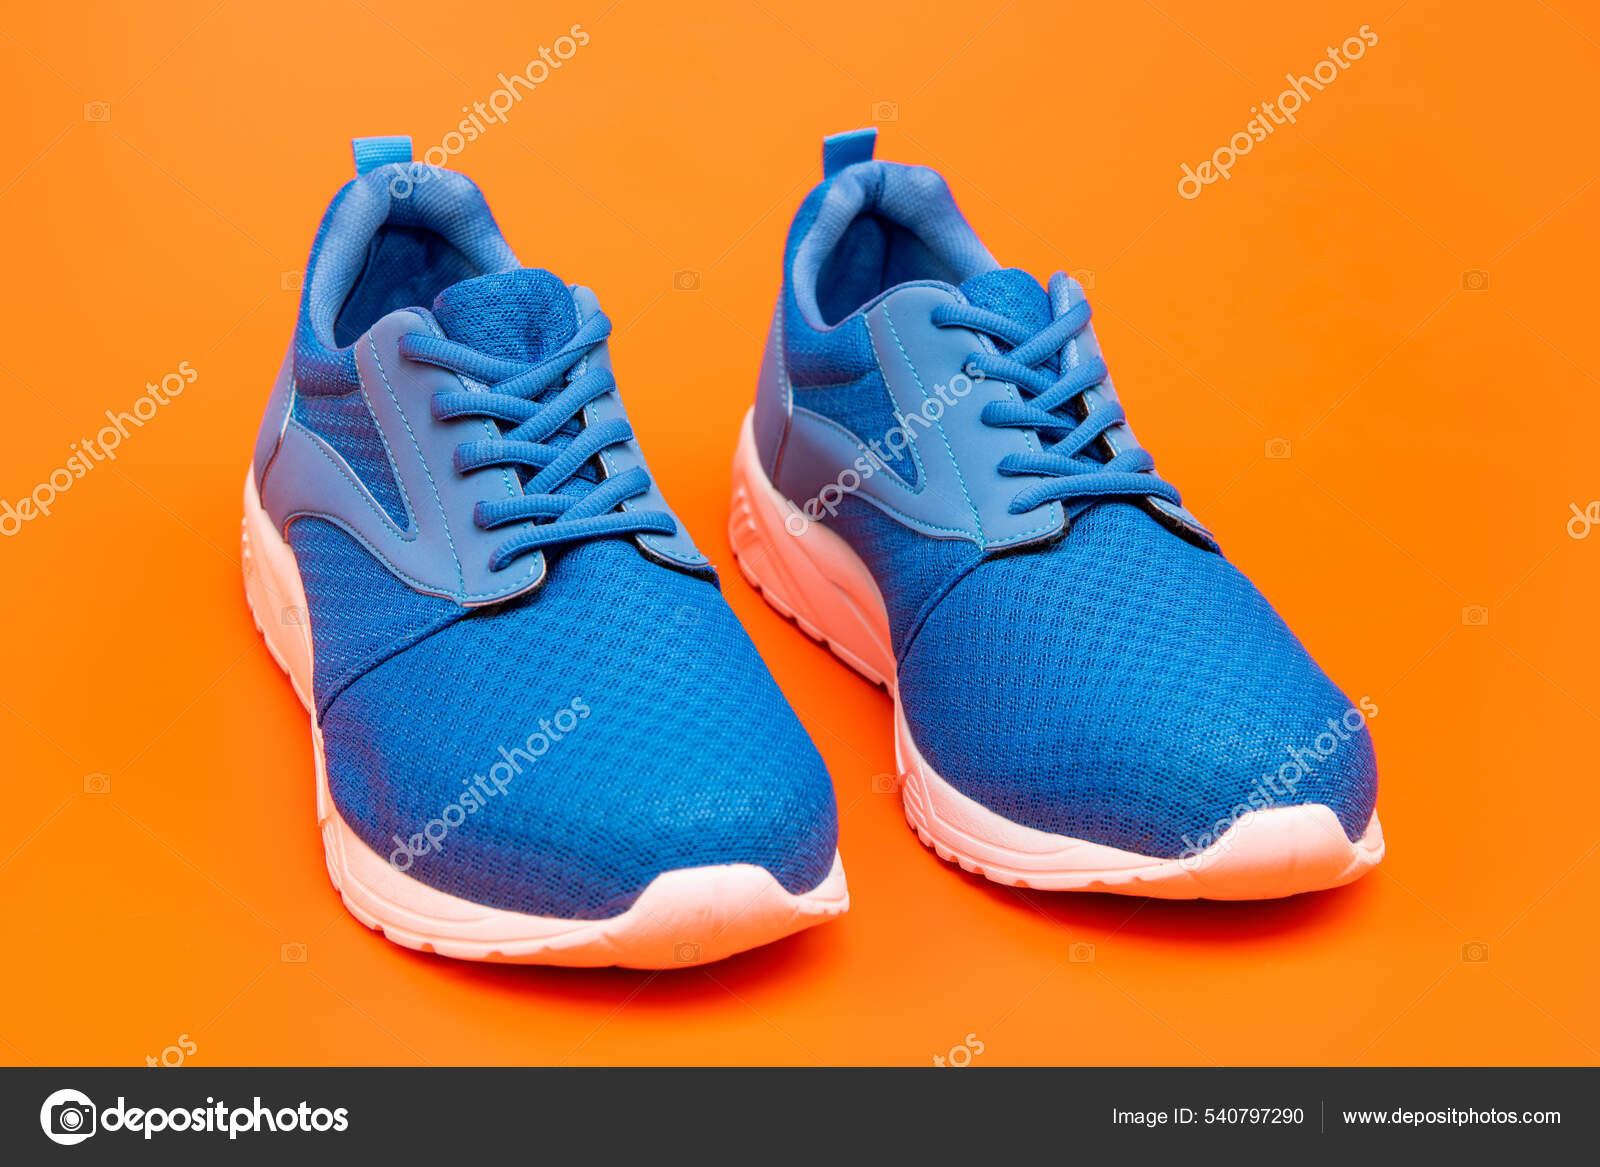 Sporty blue sneakers. shoes on orange background. shoe store. shopping ...